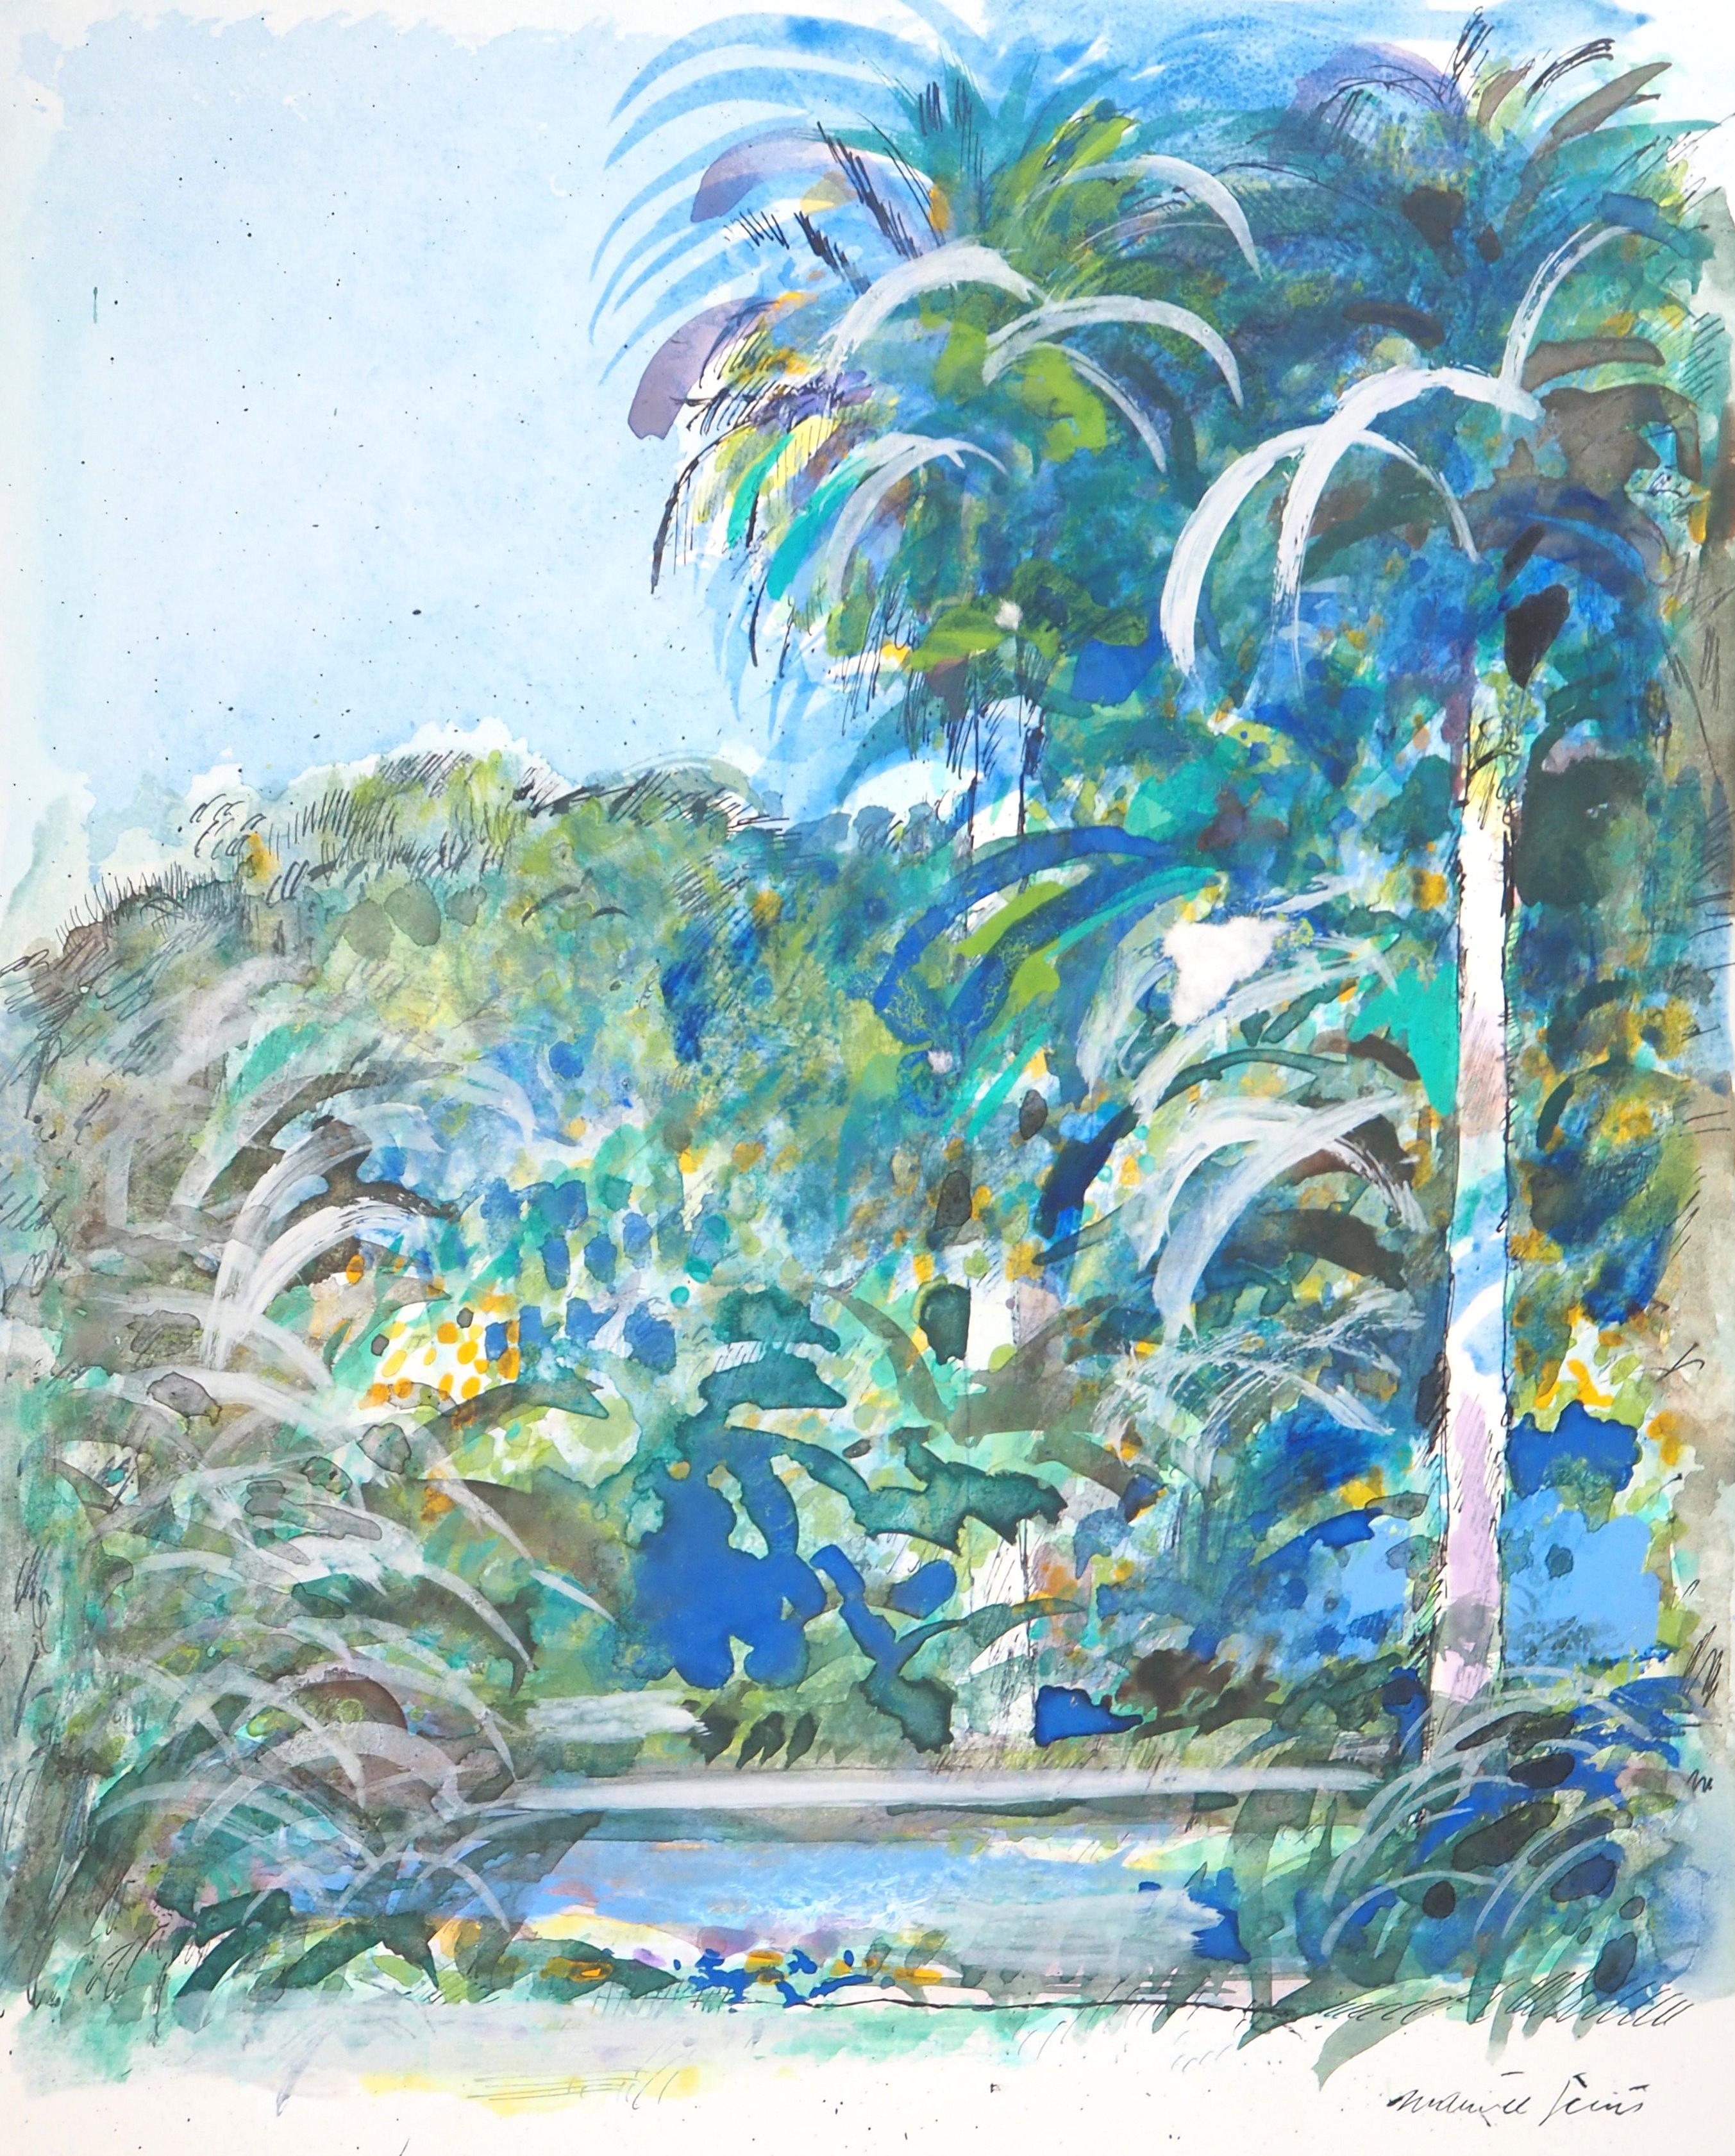 Maurice Genis Landscape Art - Tropical Dream - Original Handsigned Watercolor, Gouache and Ink Painting